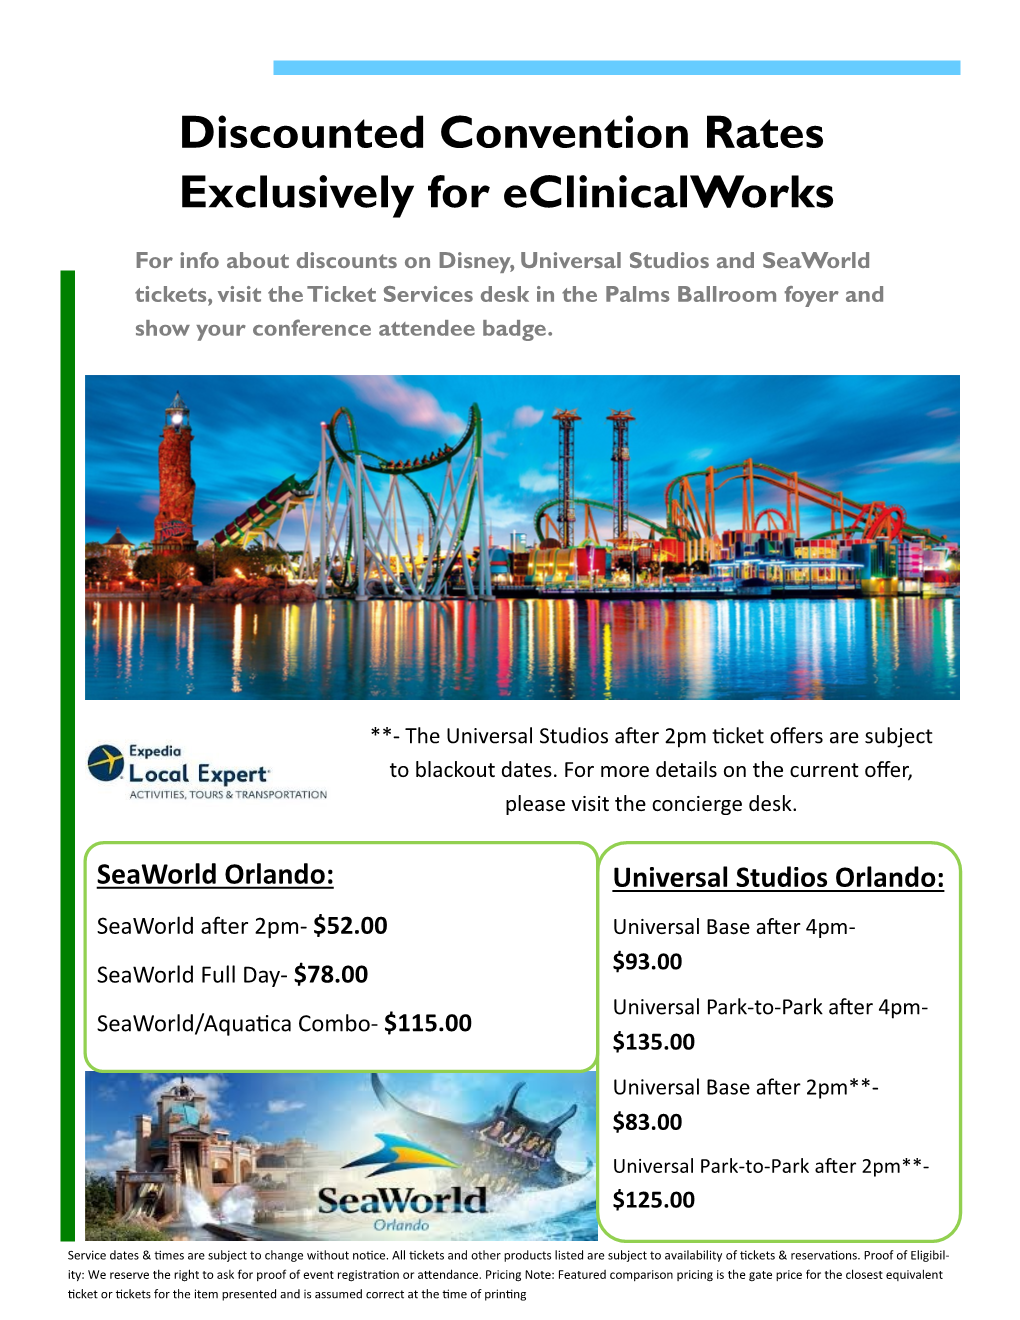 Discounted Convention Rates Exclusively for Eclinicalworks